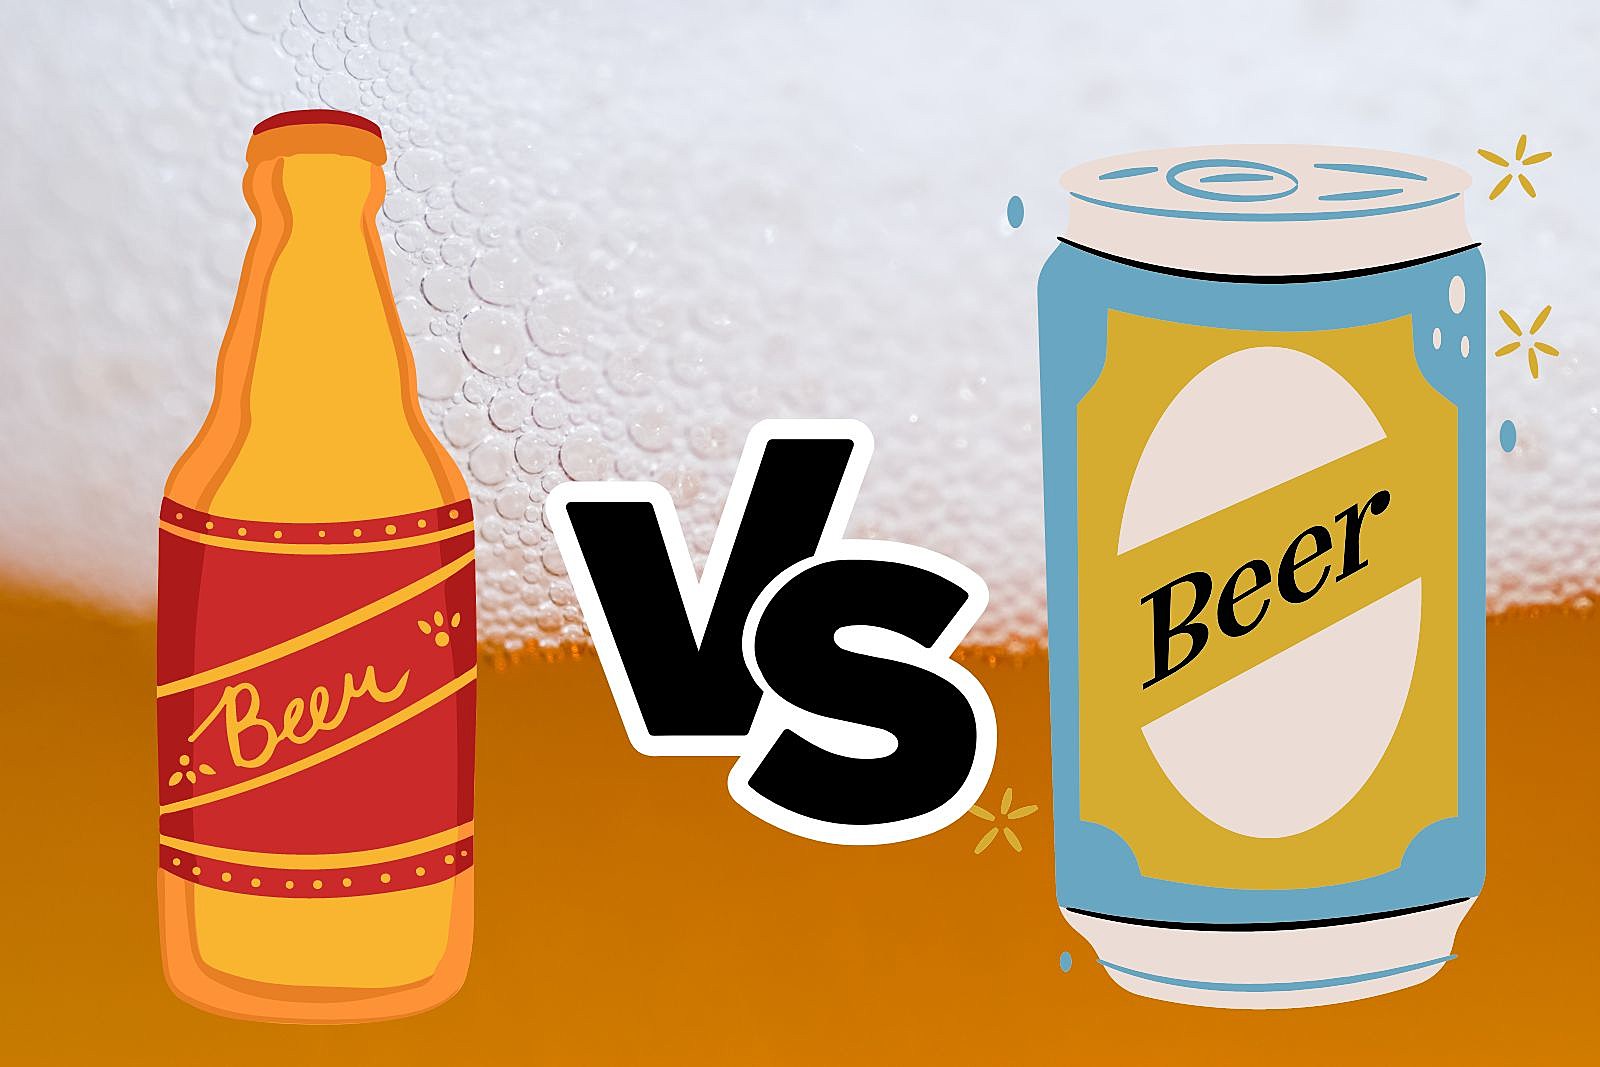 Is Beer Better in Bottles or Cans?